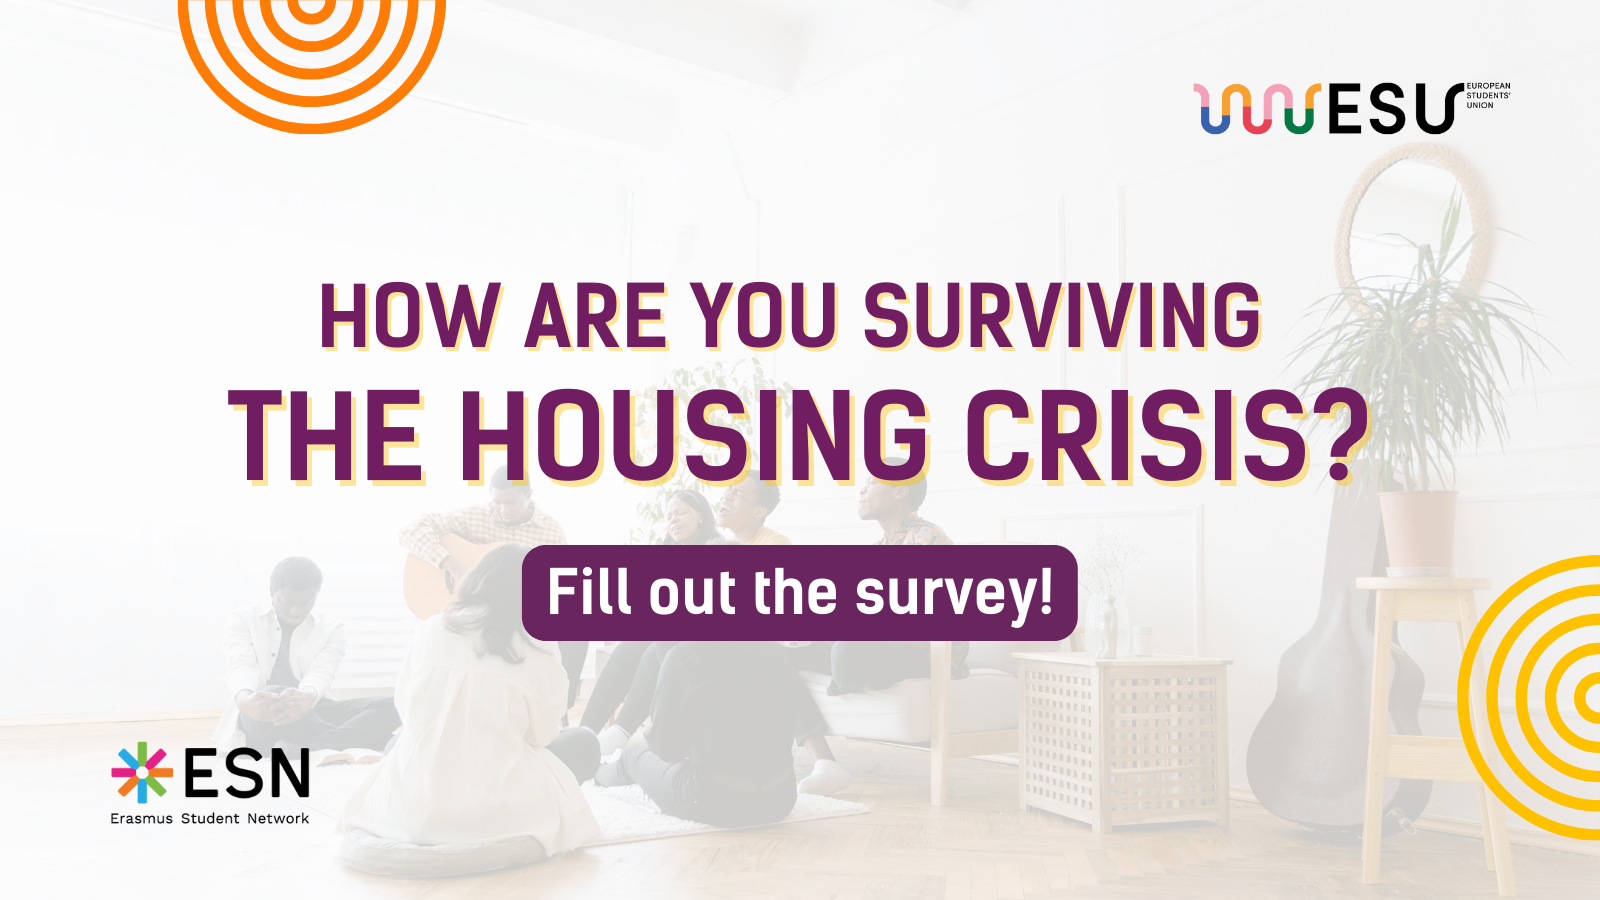 How are you surviving the housing crisis? Fill out the survey!